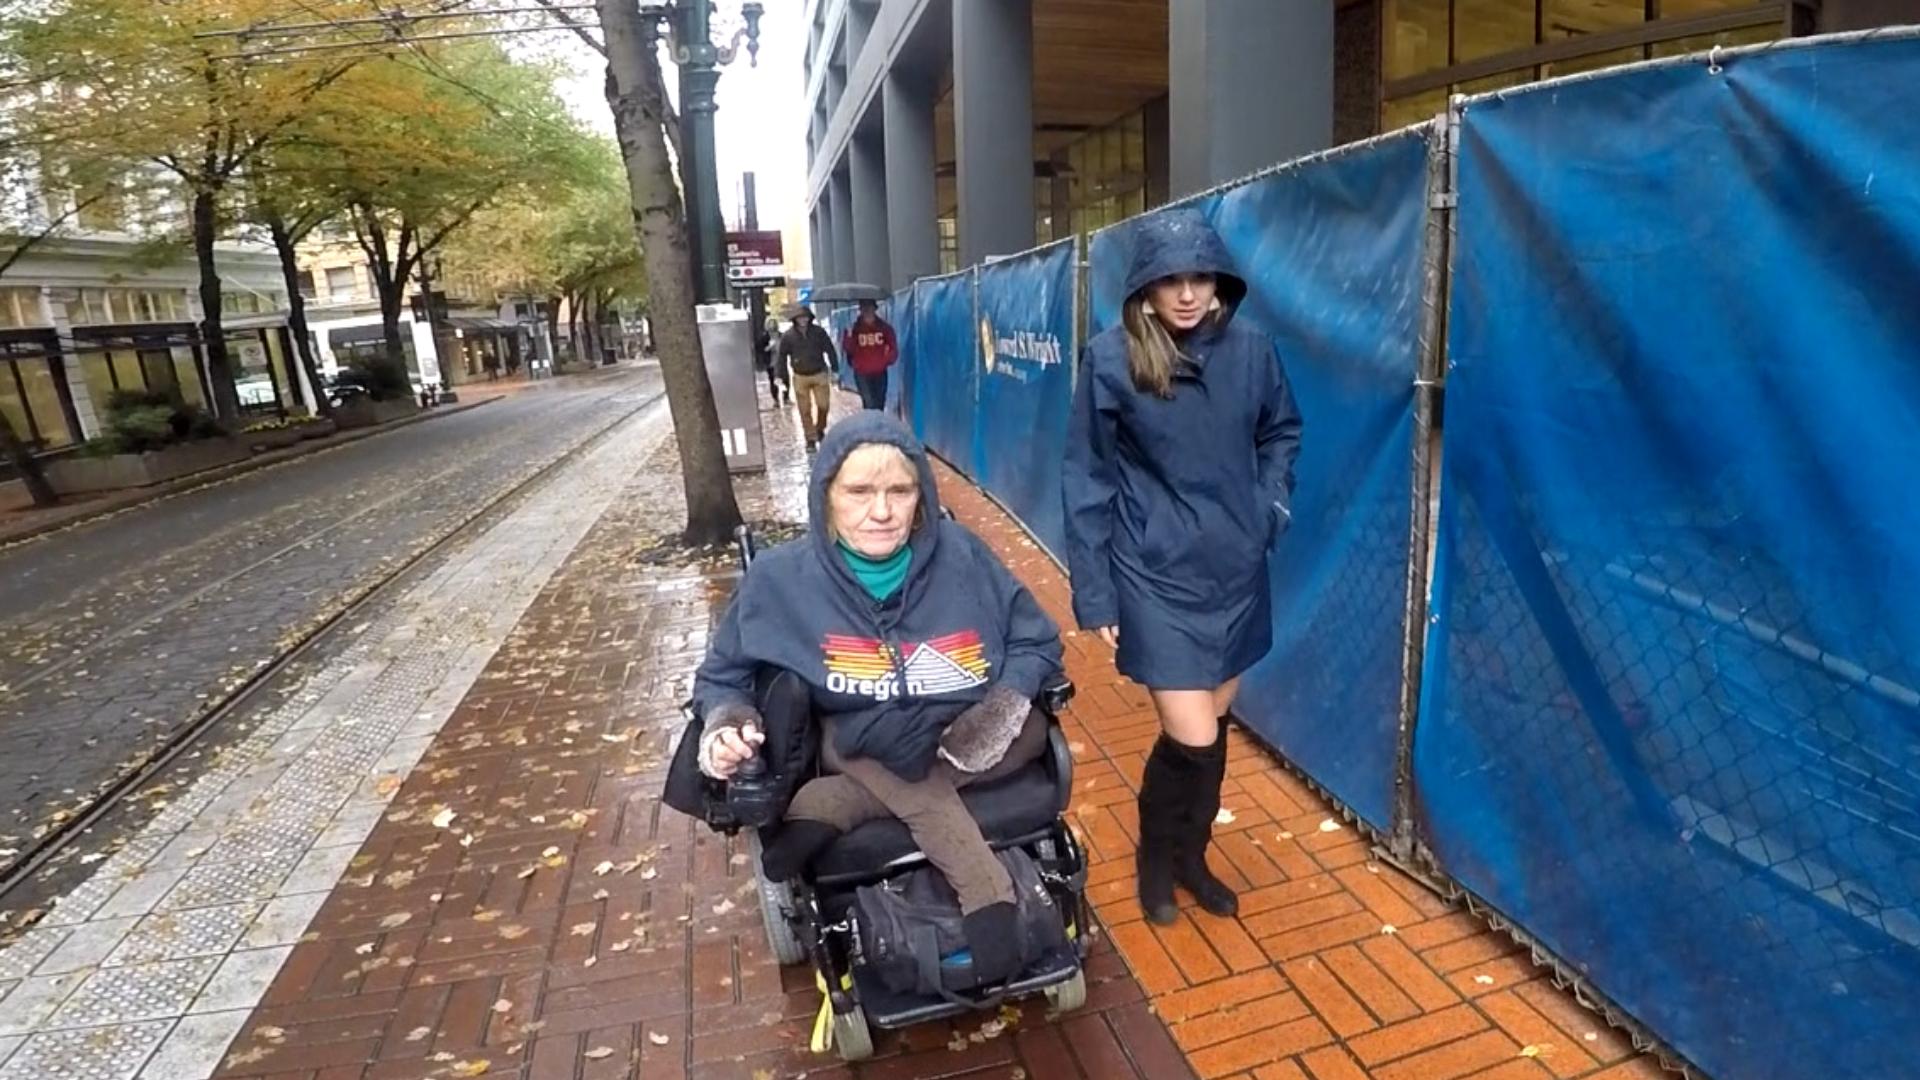 Construction zones around downtown Portland cause headache for people with disabilities who are trying to navigate streets and sidewalks.